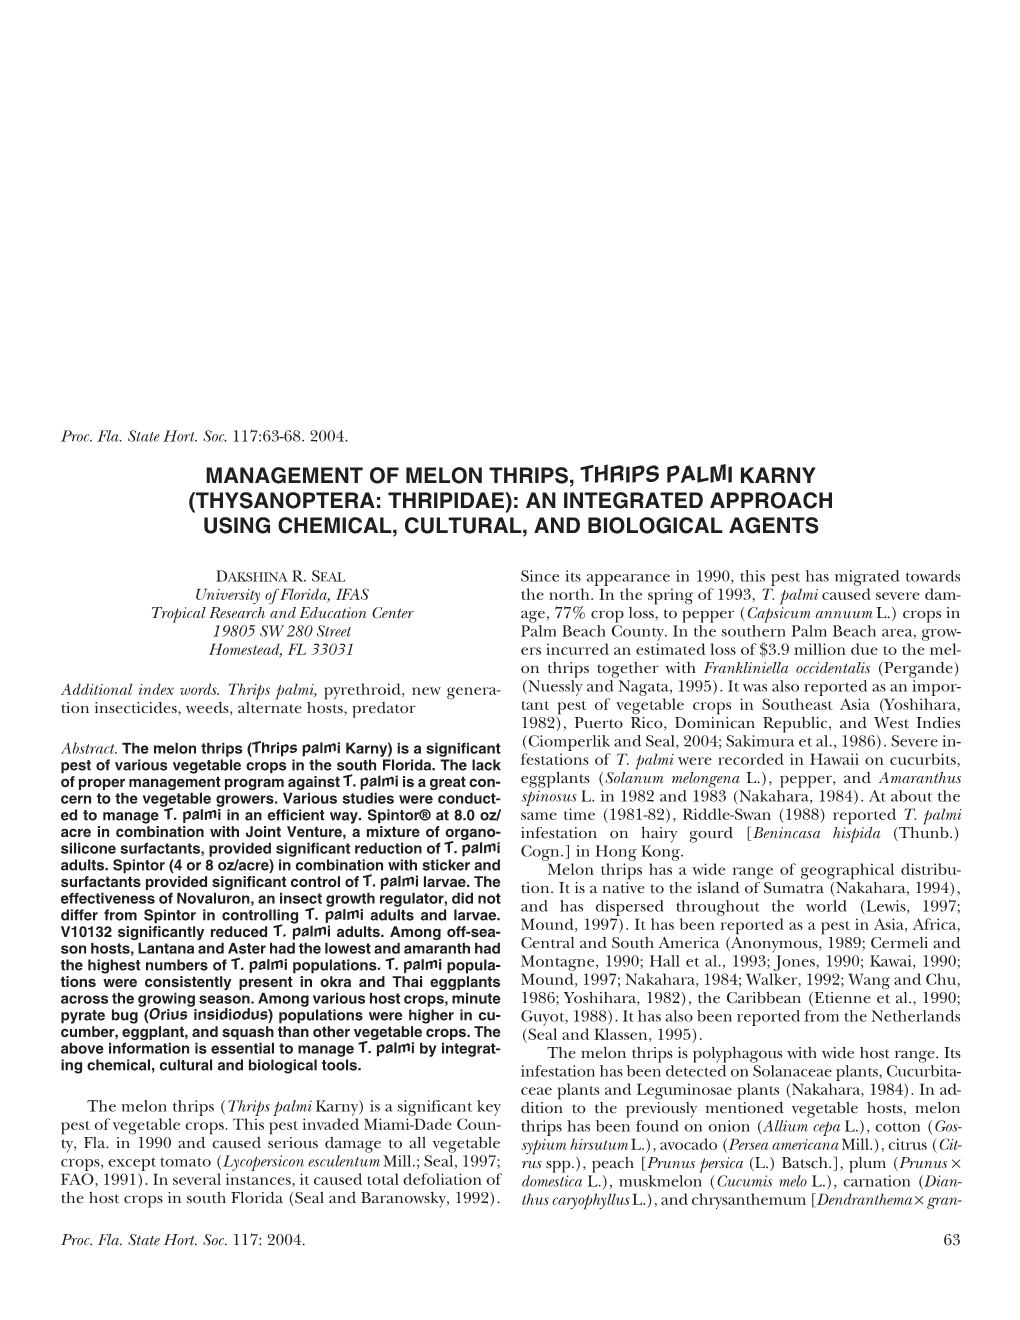 Management of Melon Thrips, Thrips Palmi Karny (Thysanoptera: Thripidae): an Integrated Approach Using Chemical, Cultural, and Biological Agents